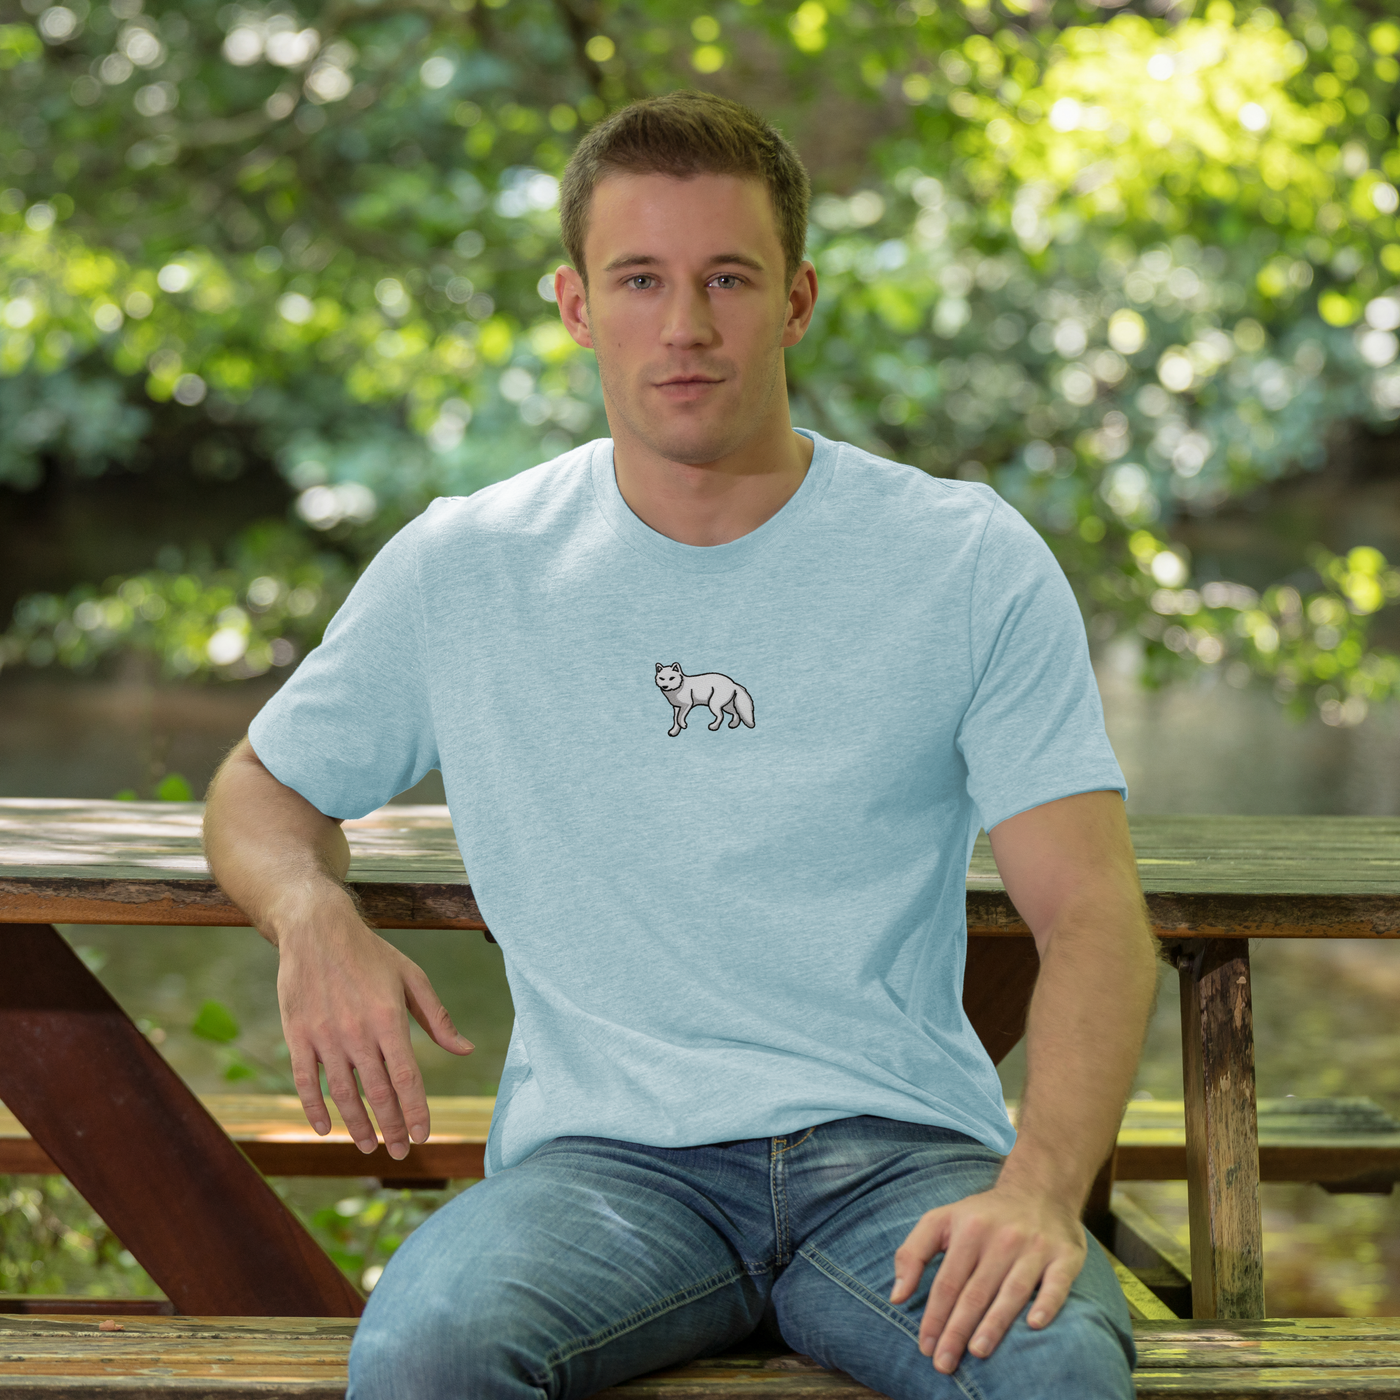 Bobby's Planet Men's Embroidered Arctic Fox T-Shirt from Arctic Polar Animals Collection in Heather Prism Ice Blue Color#color_heather-prism-ice-blue